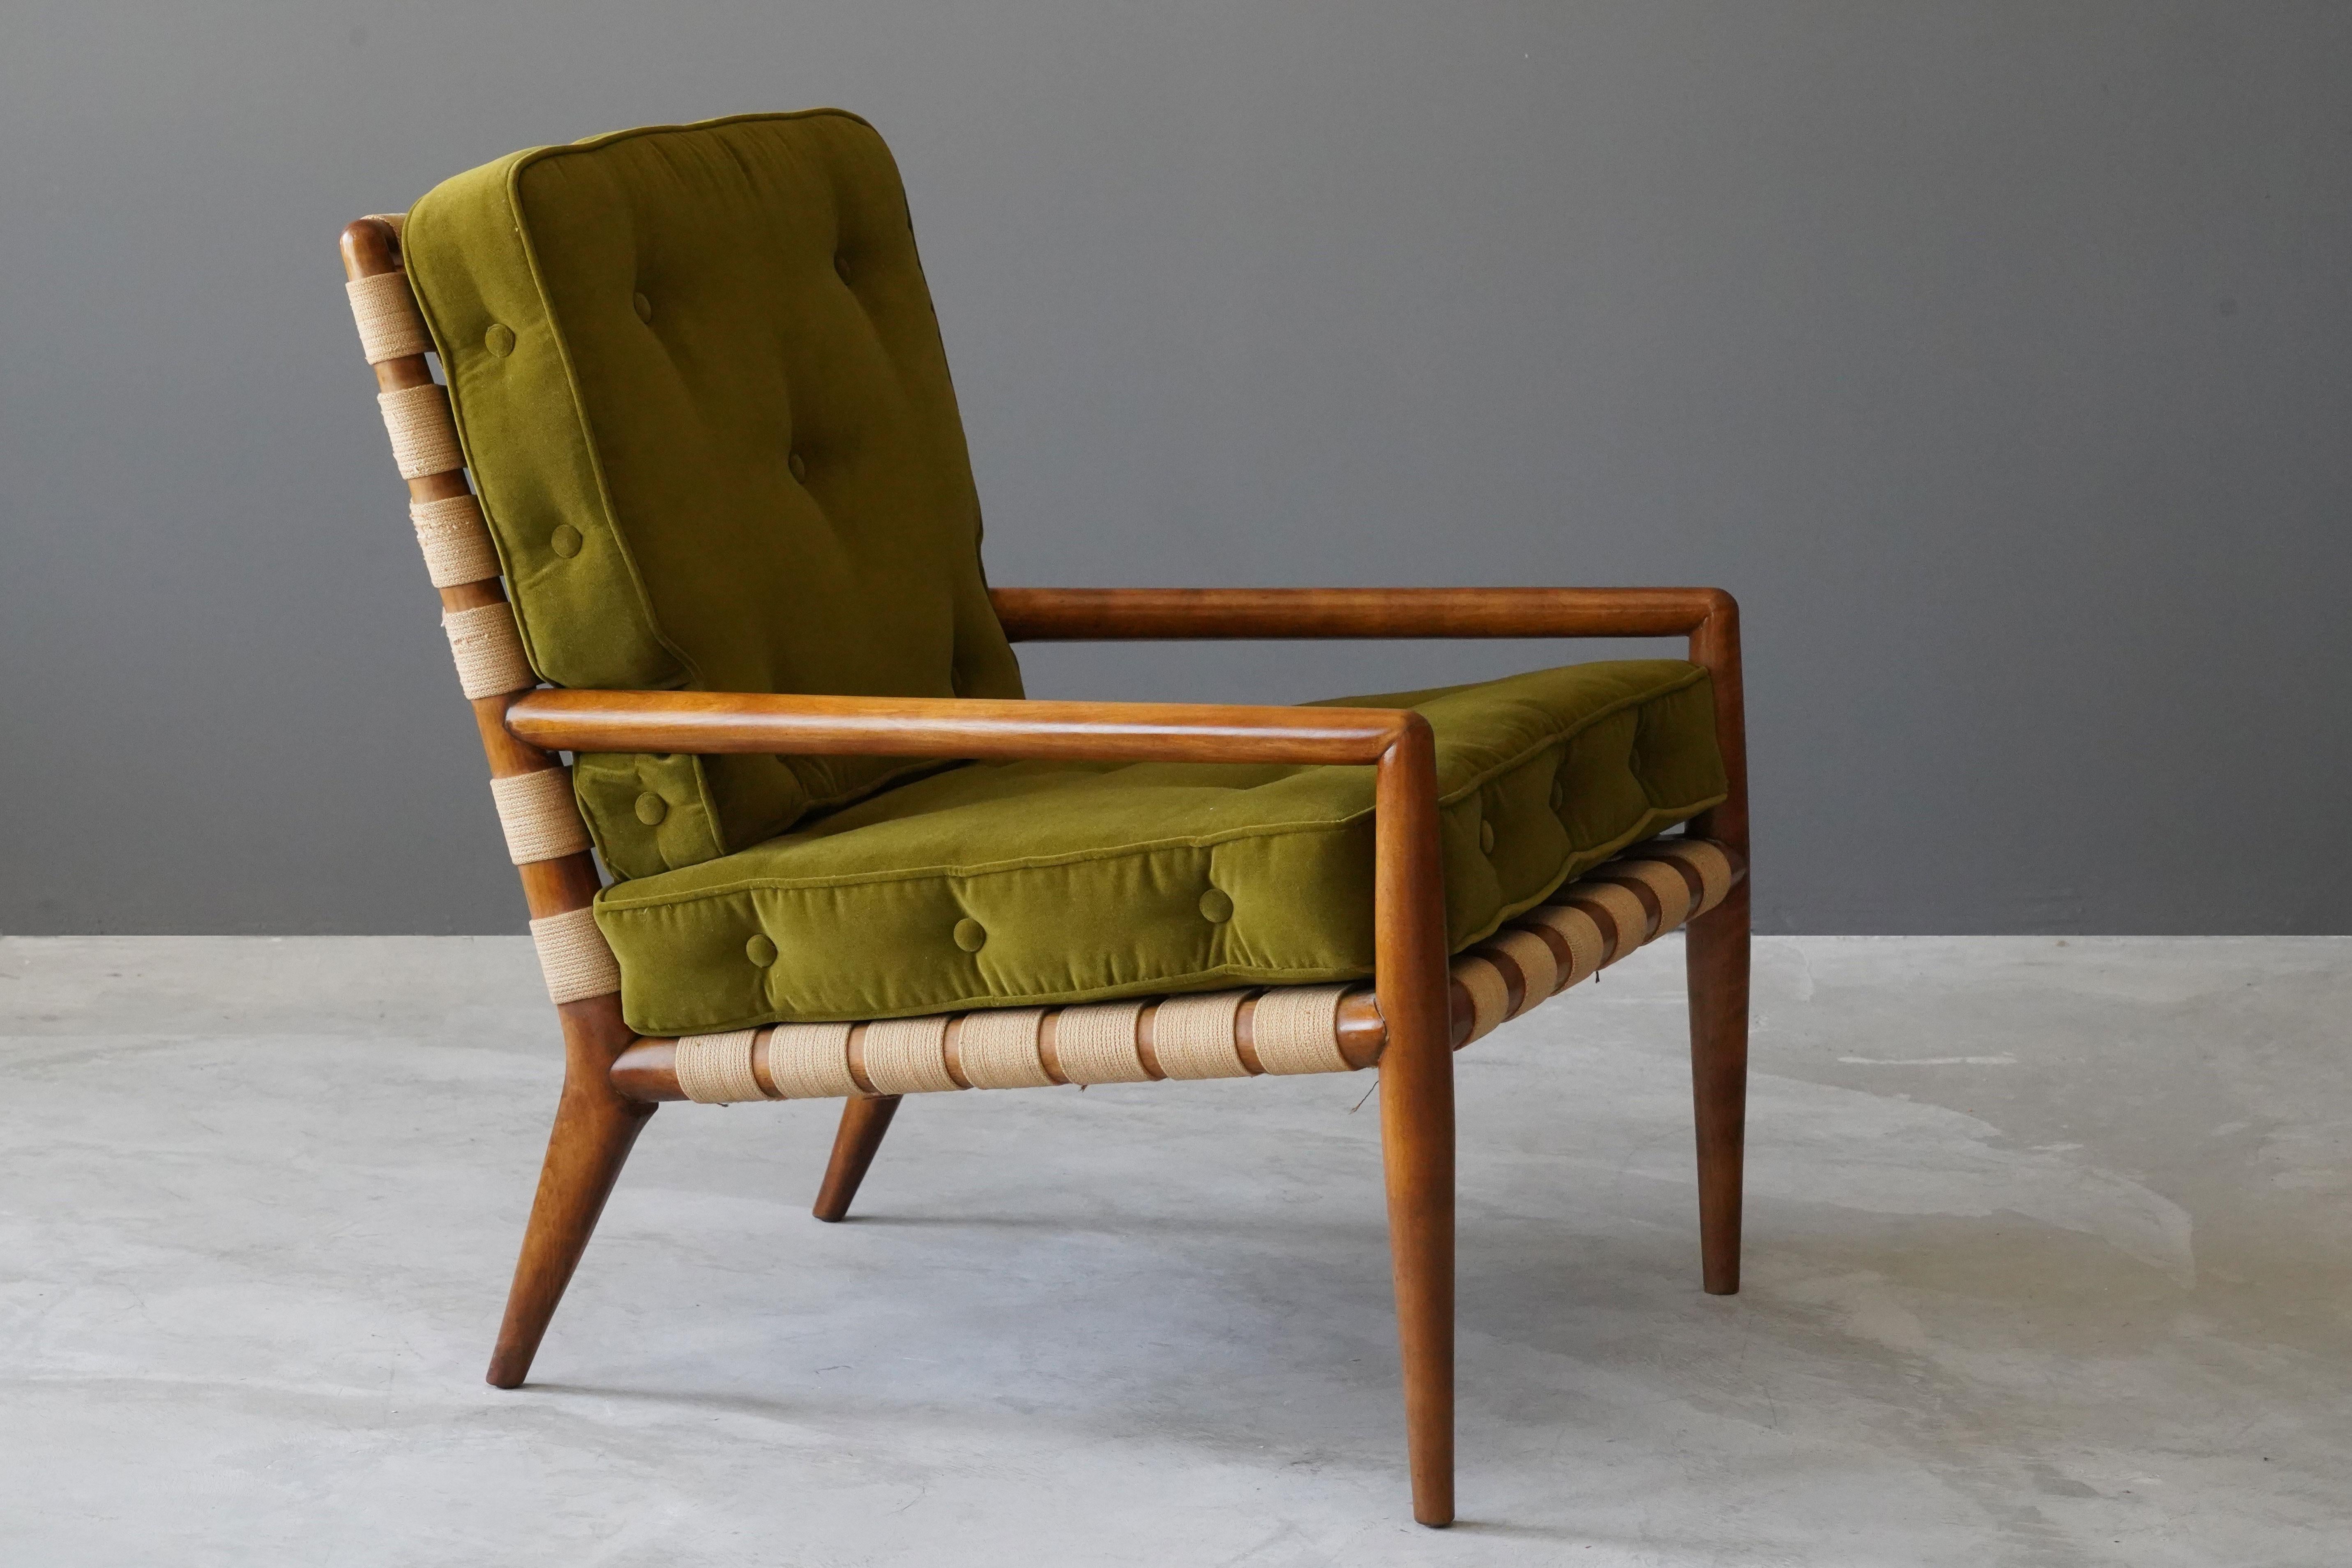 A lounge chair / armchair designed by T.H. Robsjohn-Gibbings. Produced by Widdicomb Furniture Company in Grand Rapids, Michigan, circa 1950s. Executed in walnut, original webbing, seat cushions with brand new high-end velvet upholstery.